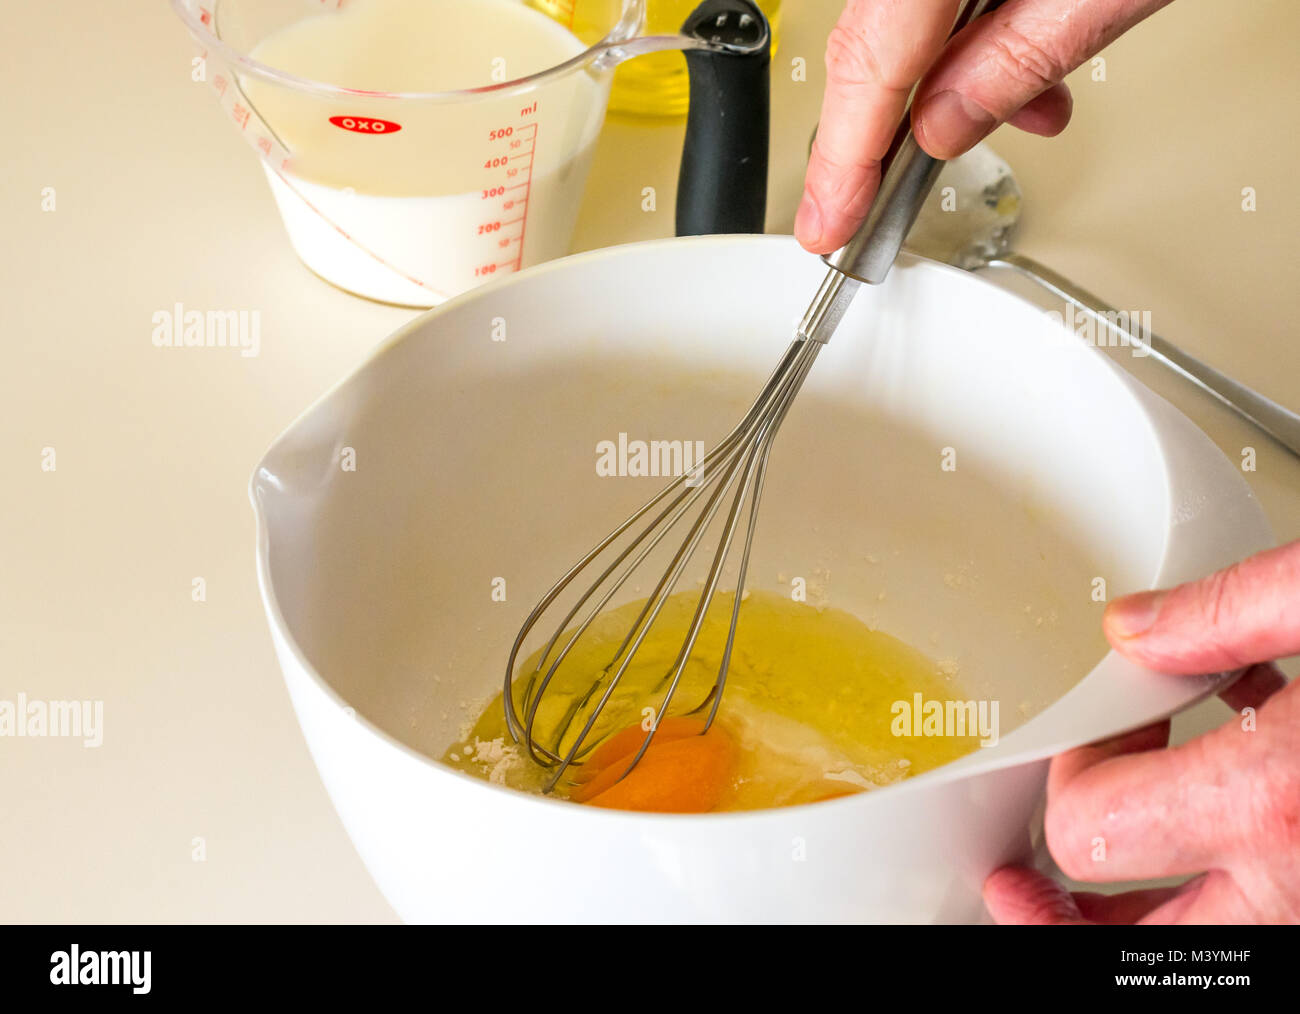 Man beating mixture with whisk to make pancake batter for Shrove Tuesday with flour, milk, eggs, and oil in a home kitchen Stock Photo